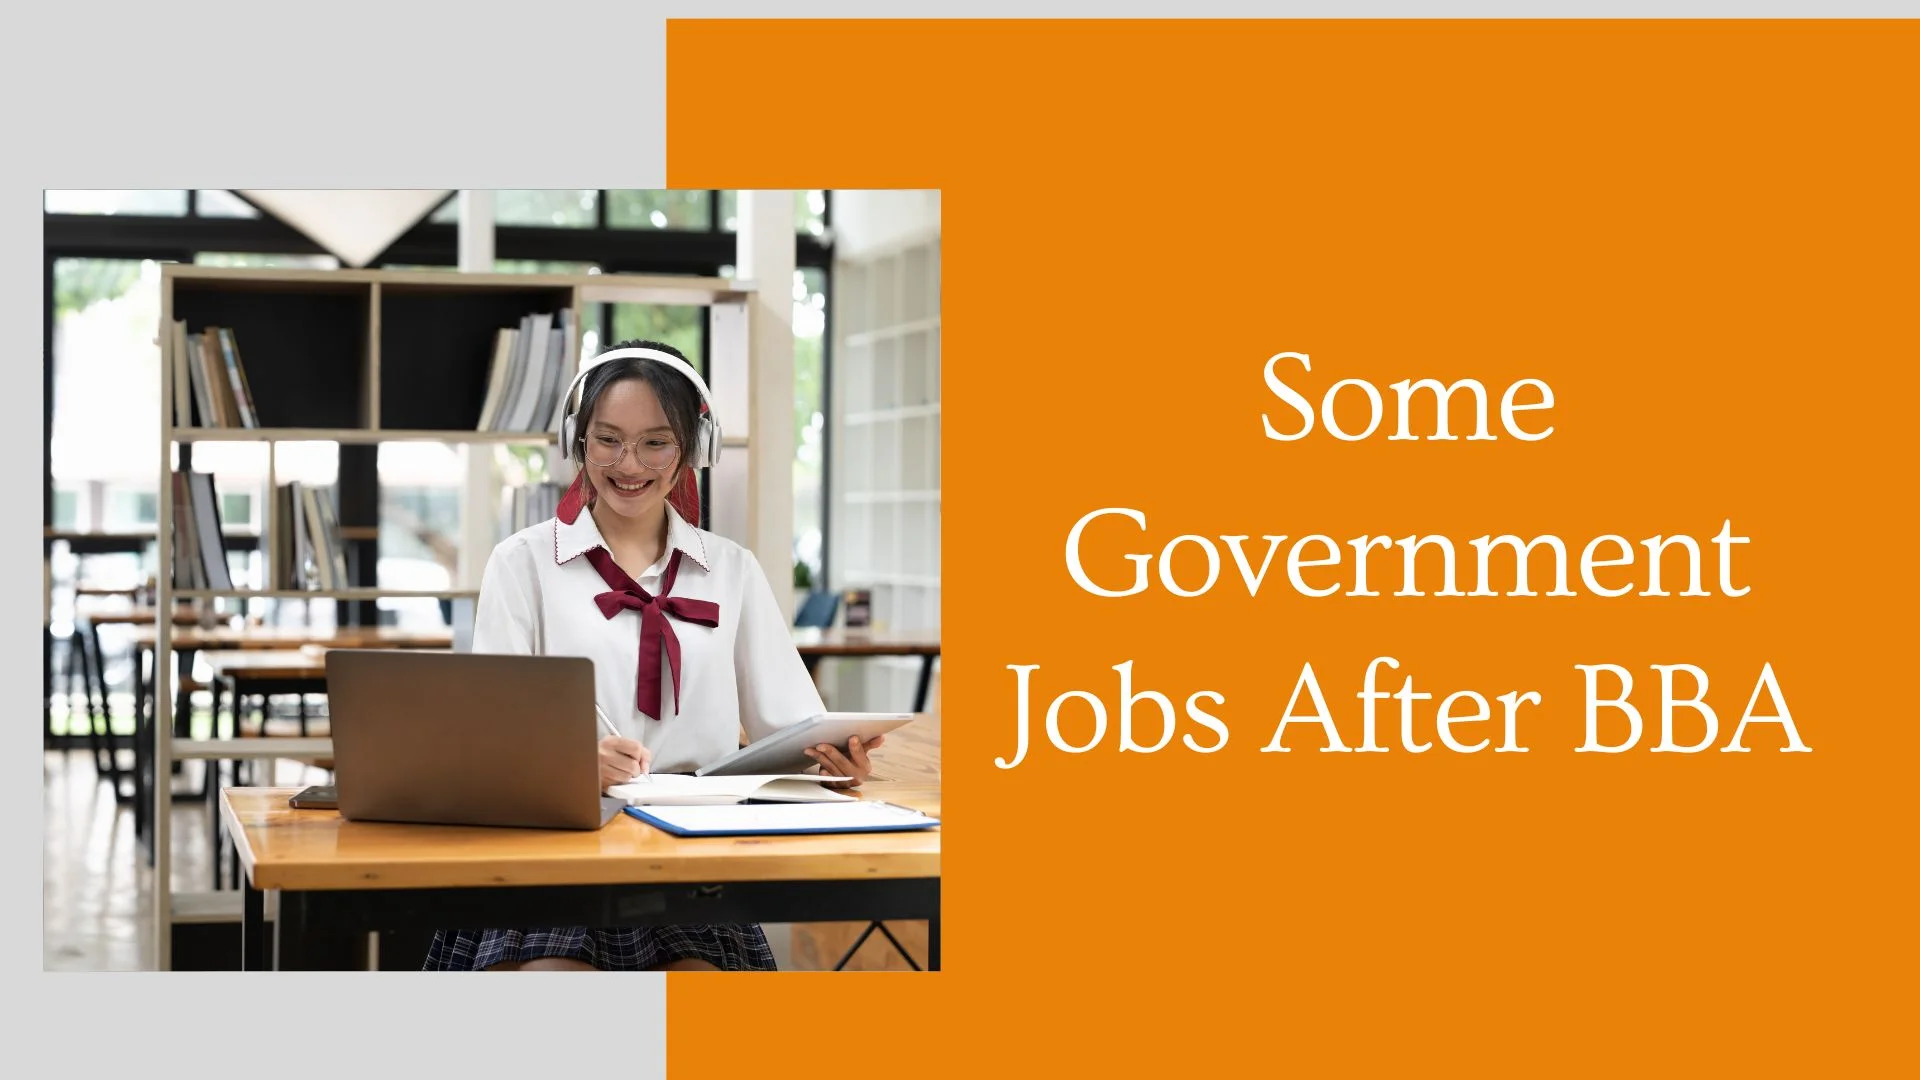 Some Government Jobs After BBA